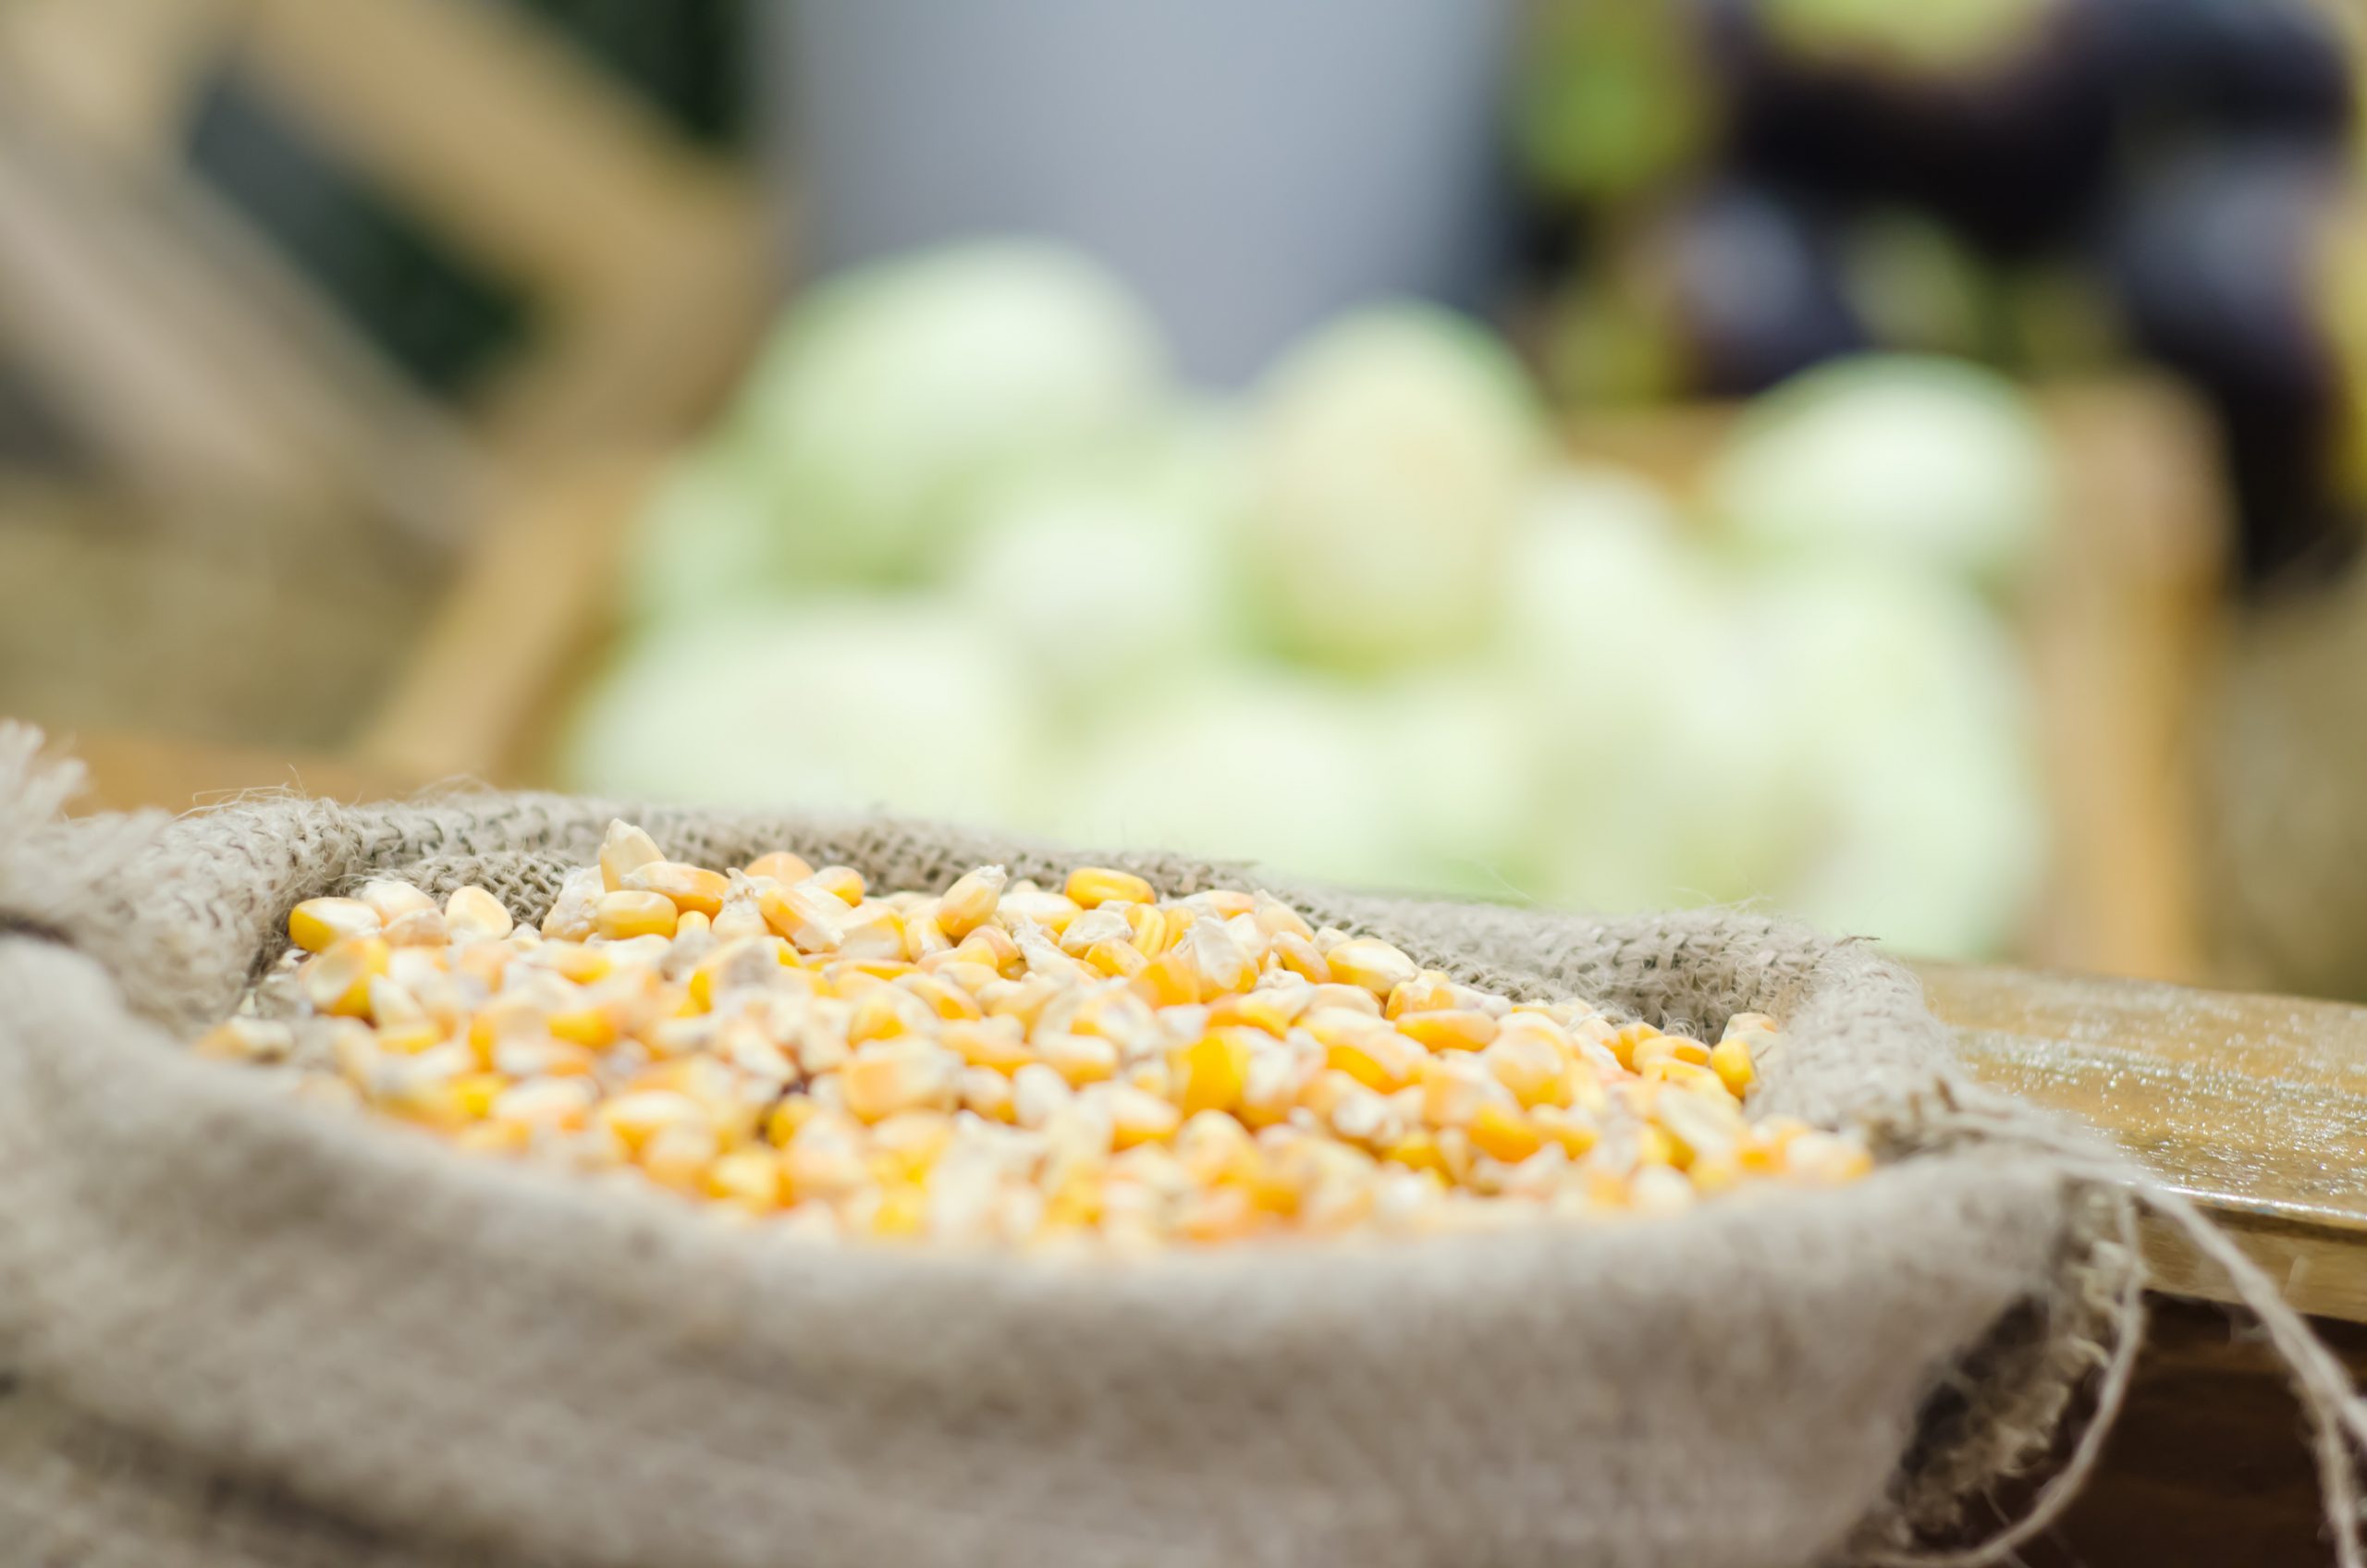 Biocontrol of aflatoxins: Potential for Africa. Photo: Shutterstock